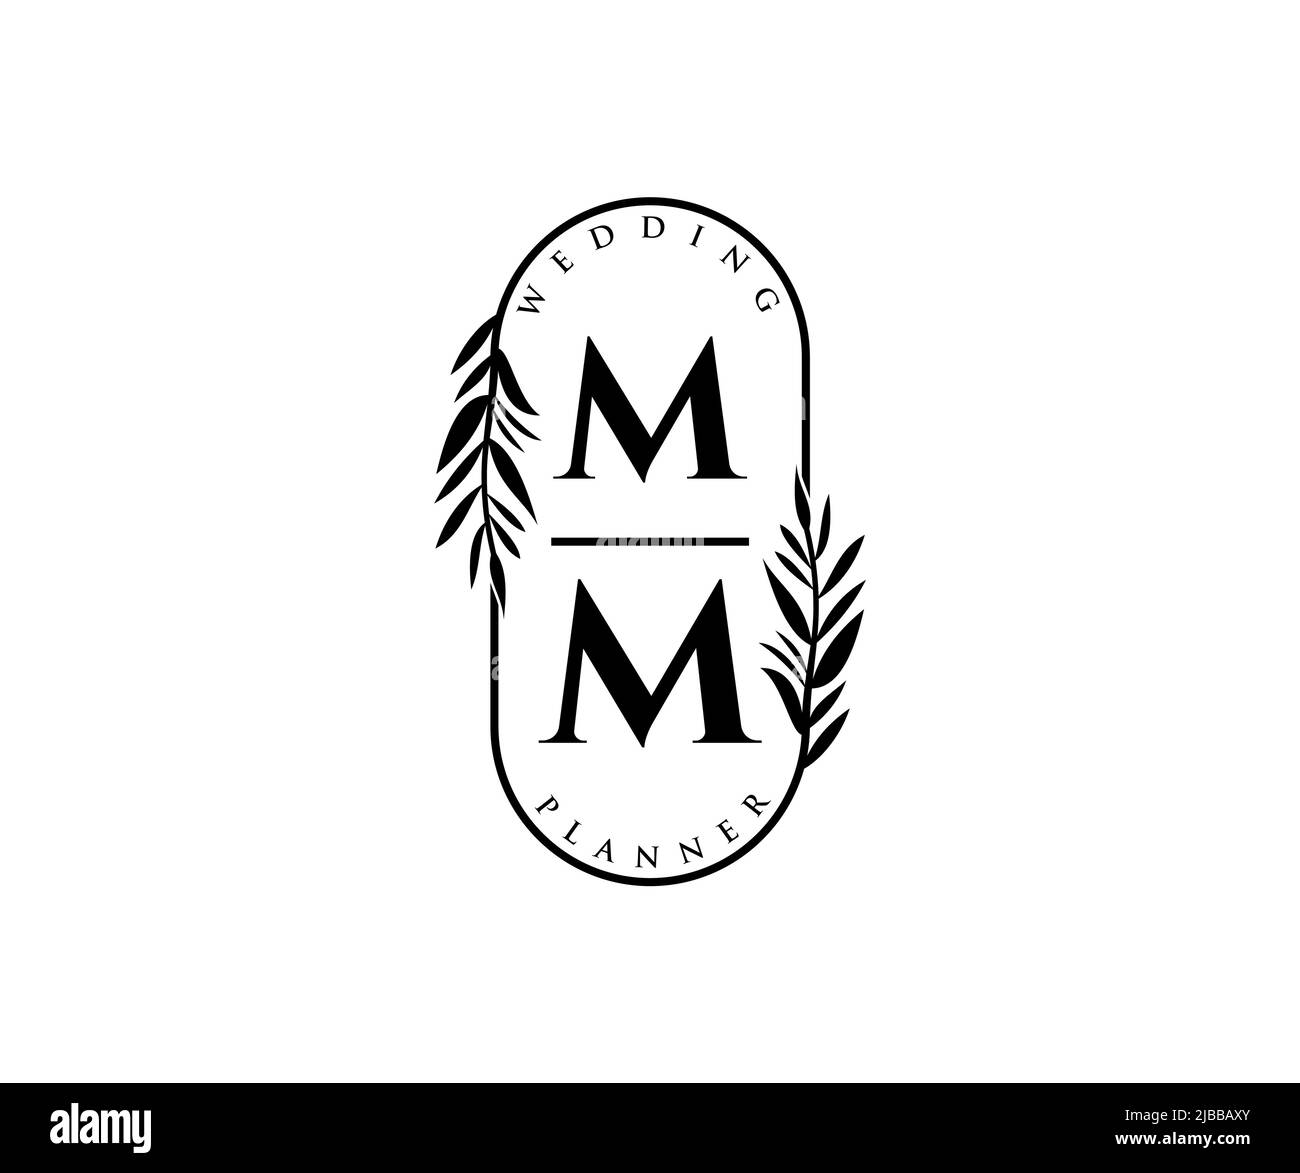 Mm love Stock Vector Images - Alamy